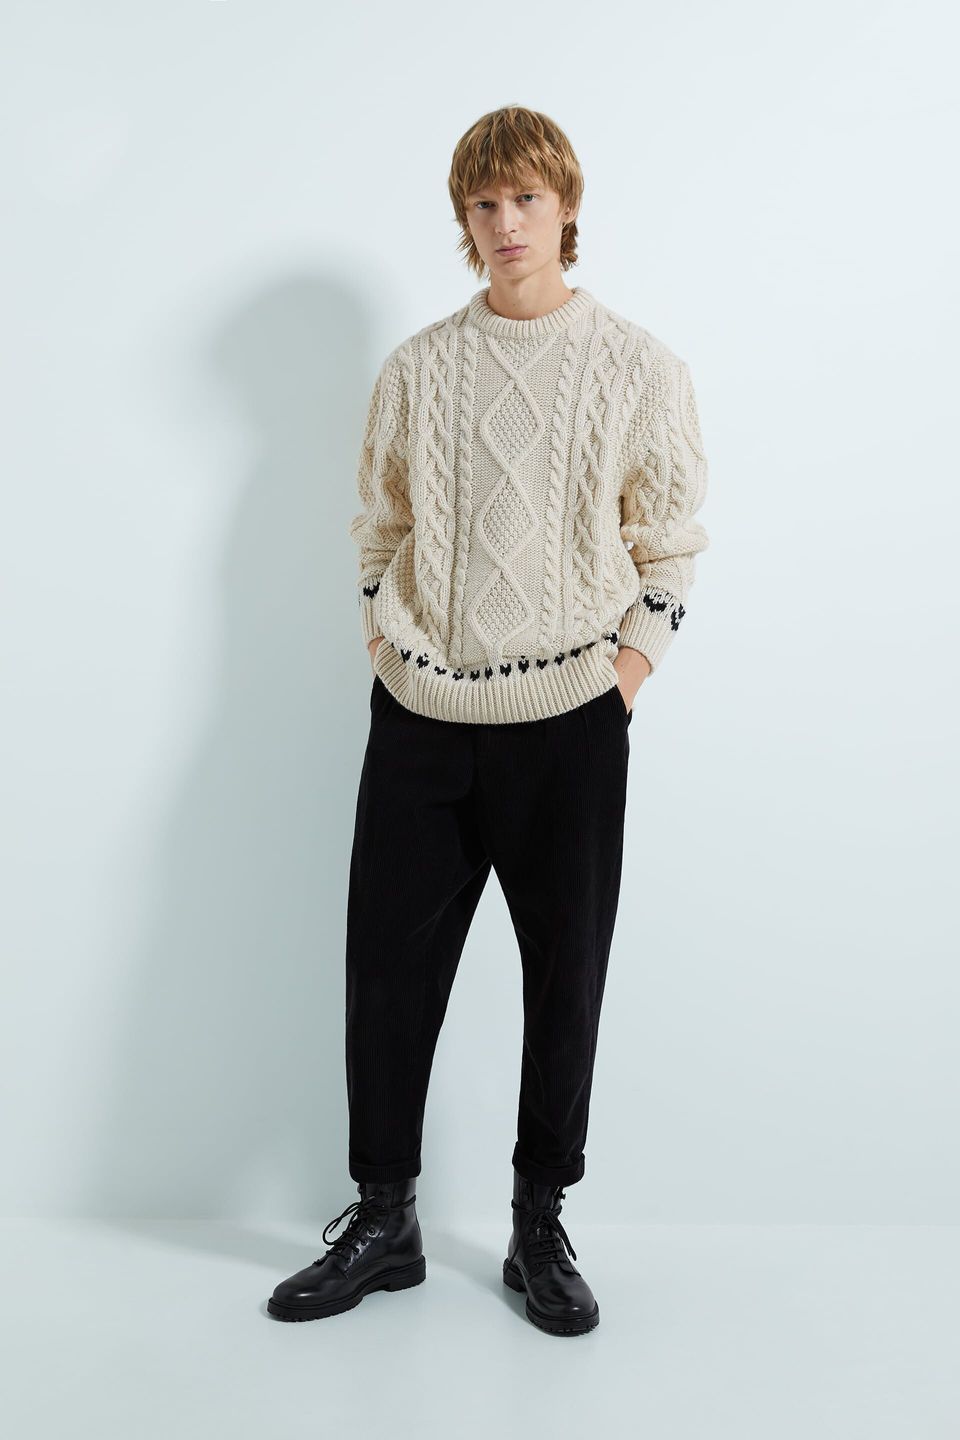 Zara Textured Cable Knit Sweater With Contrasting Trim, $69.90